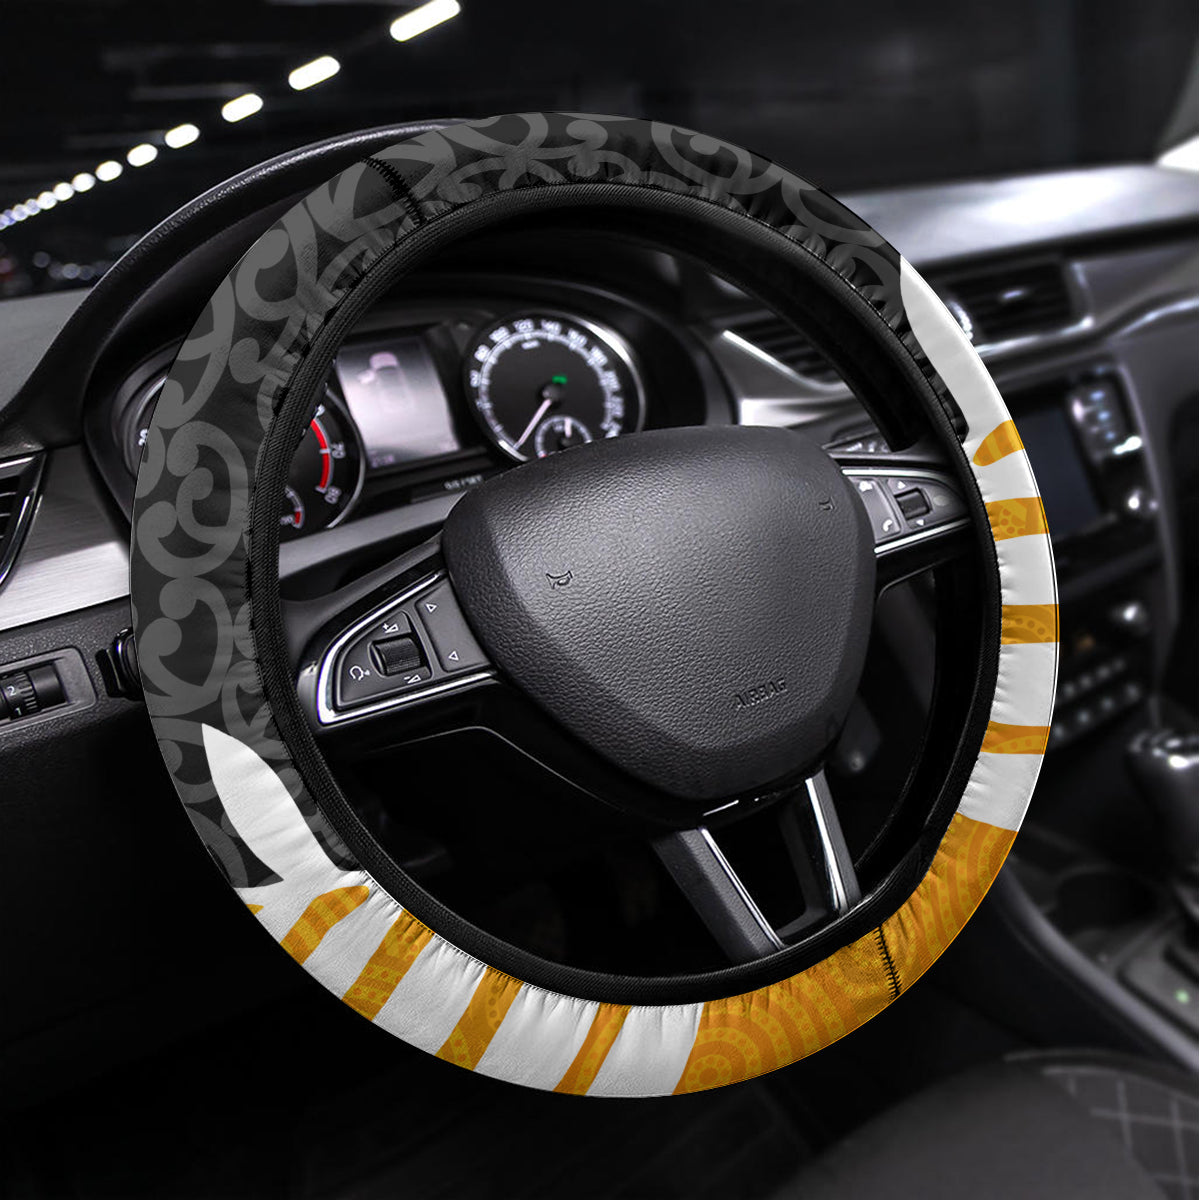 New Zealand and Australia Rugby Steering Wheel Cover Koala and Maori Warrior Together